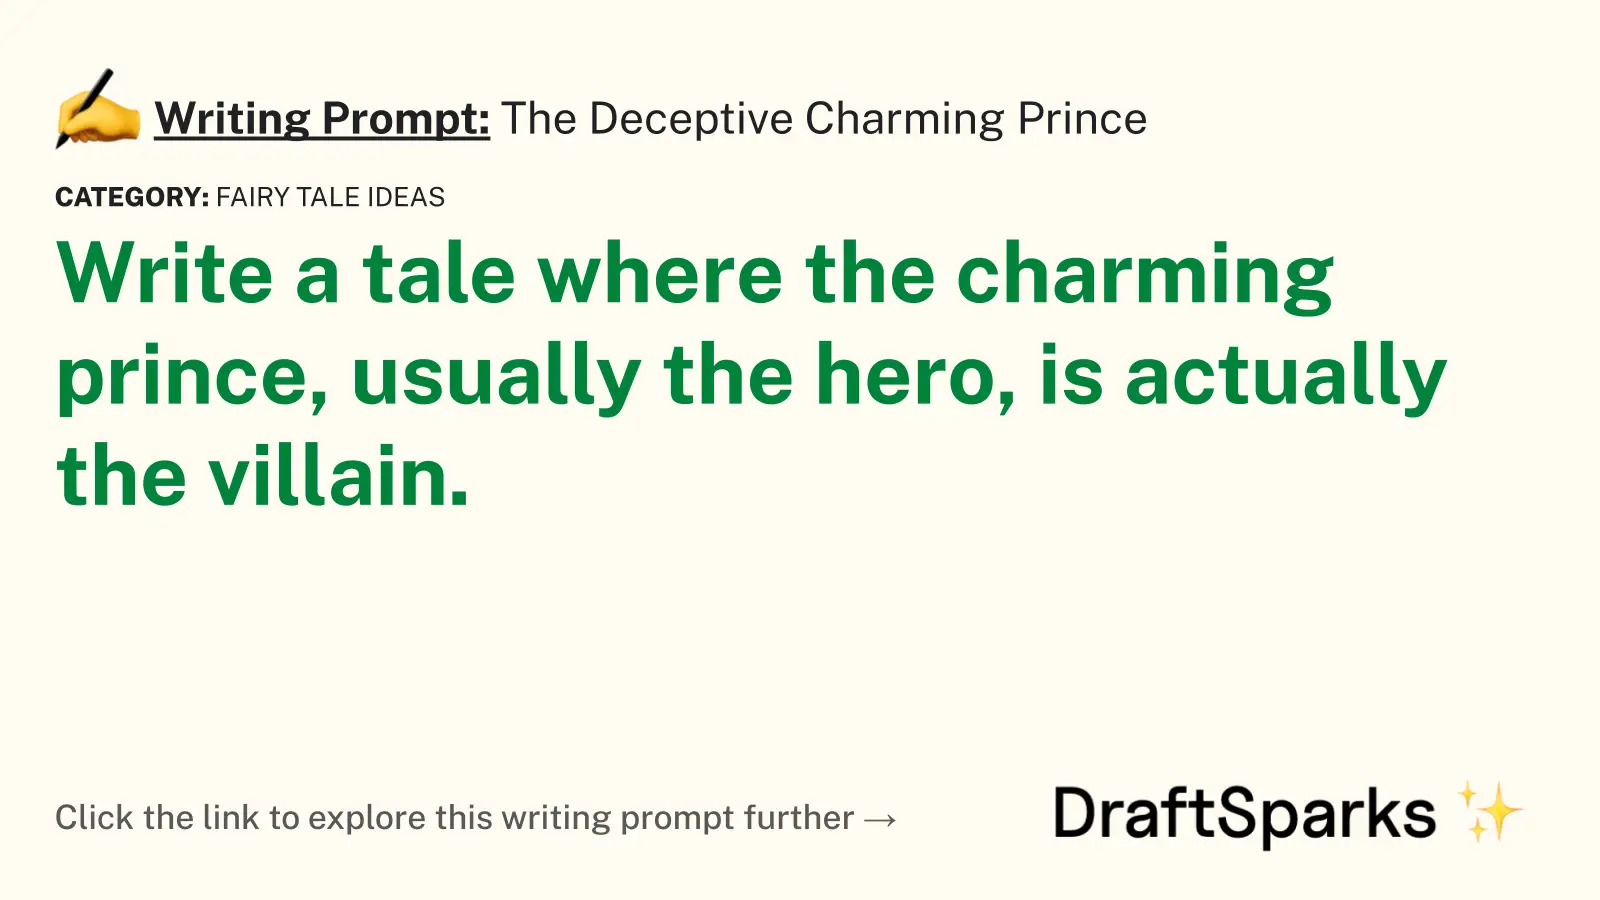 The Deceptive Charming Prince